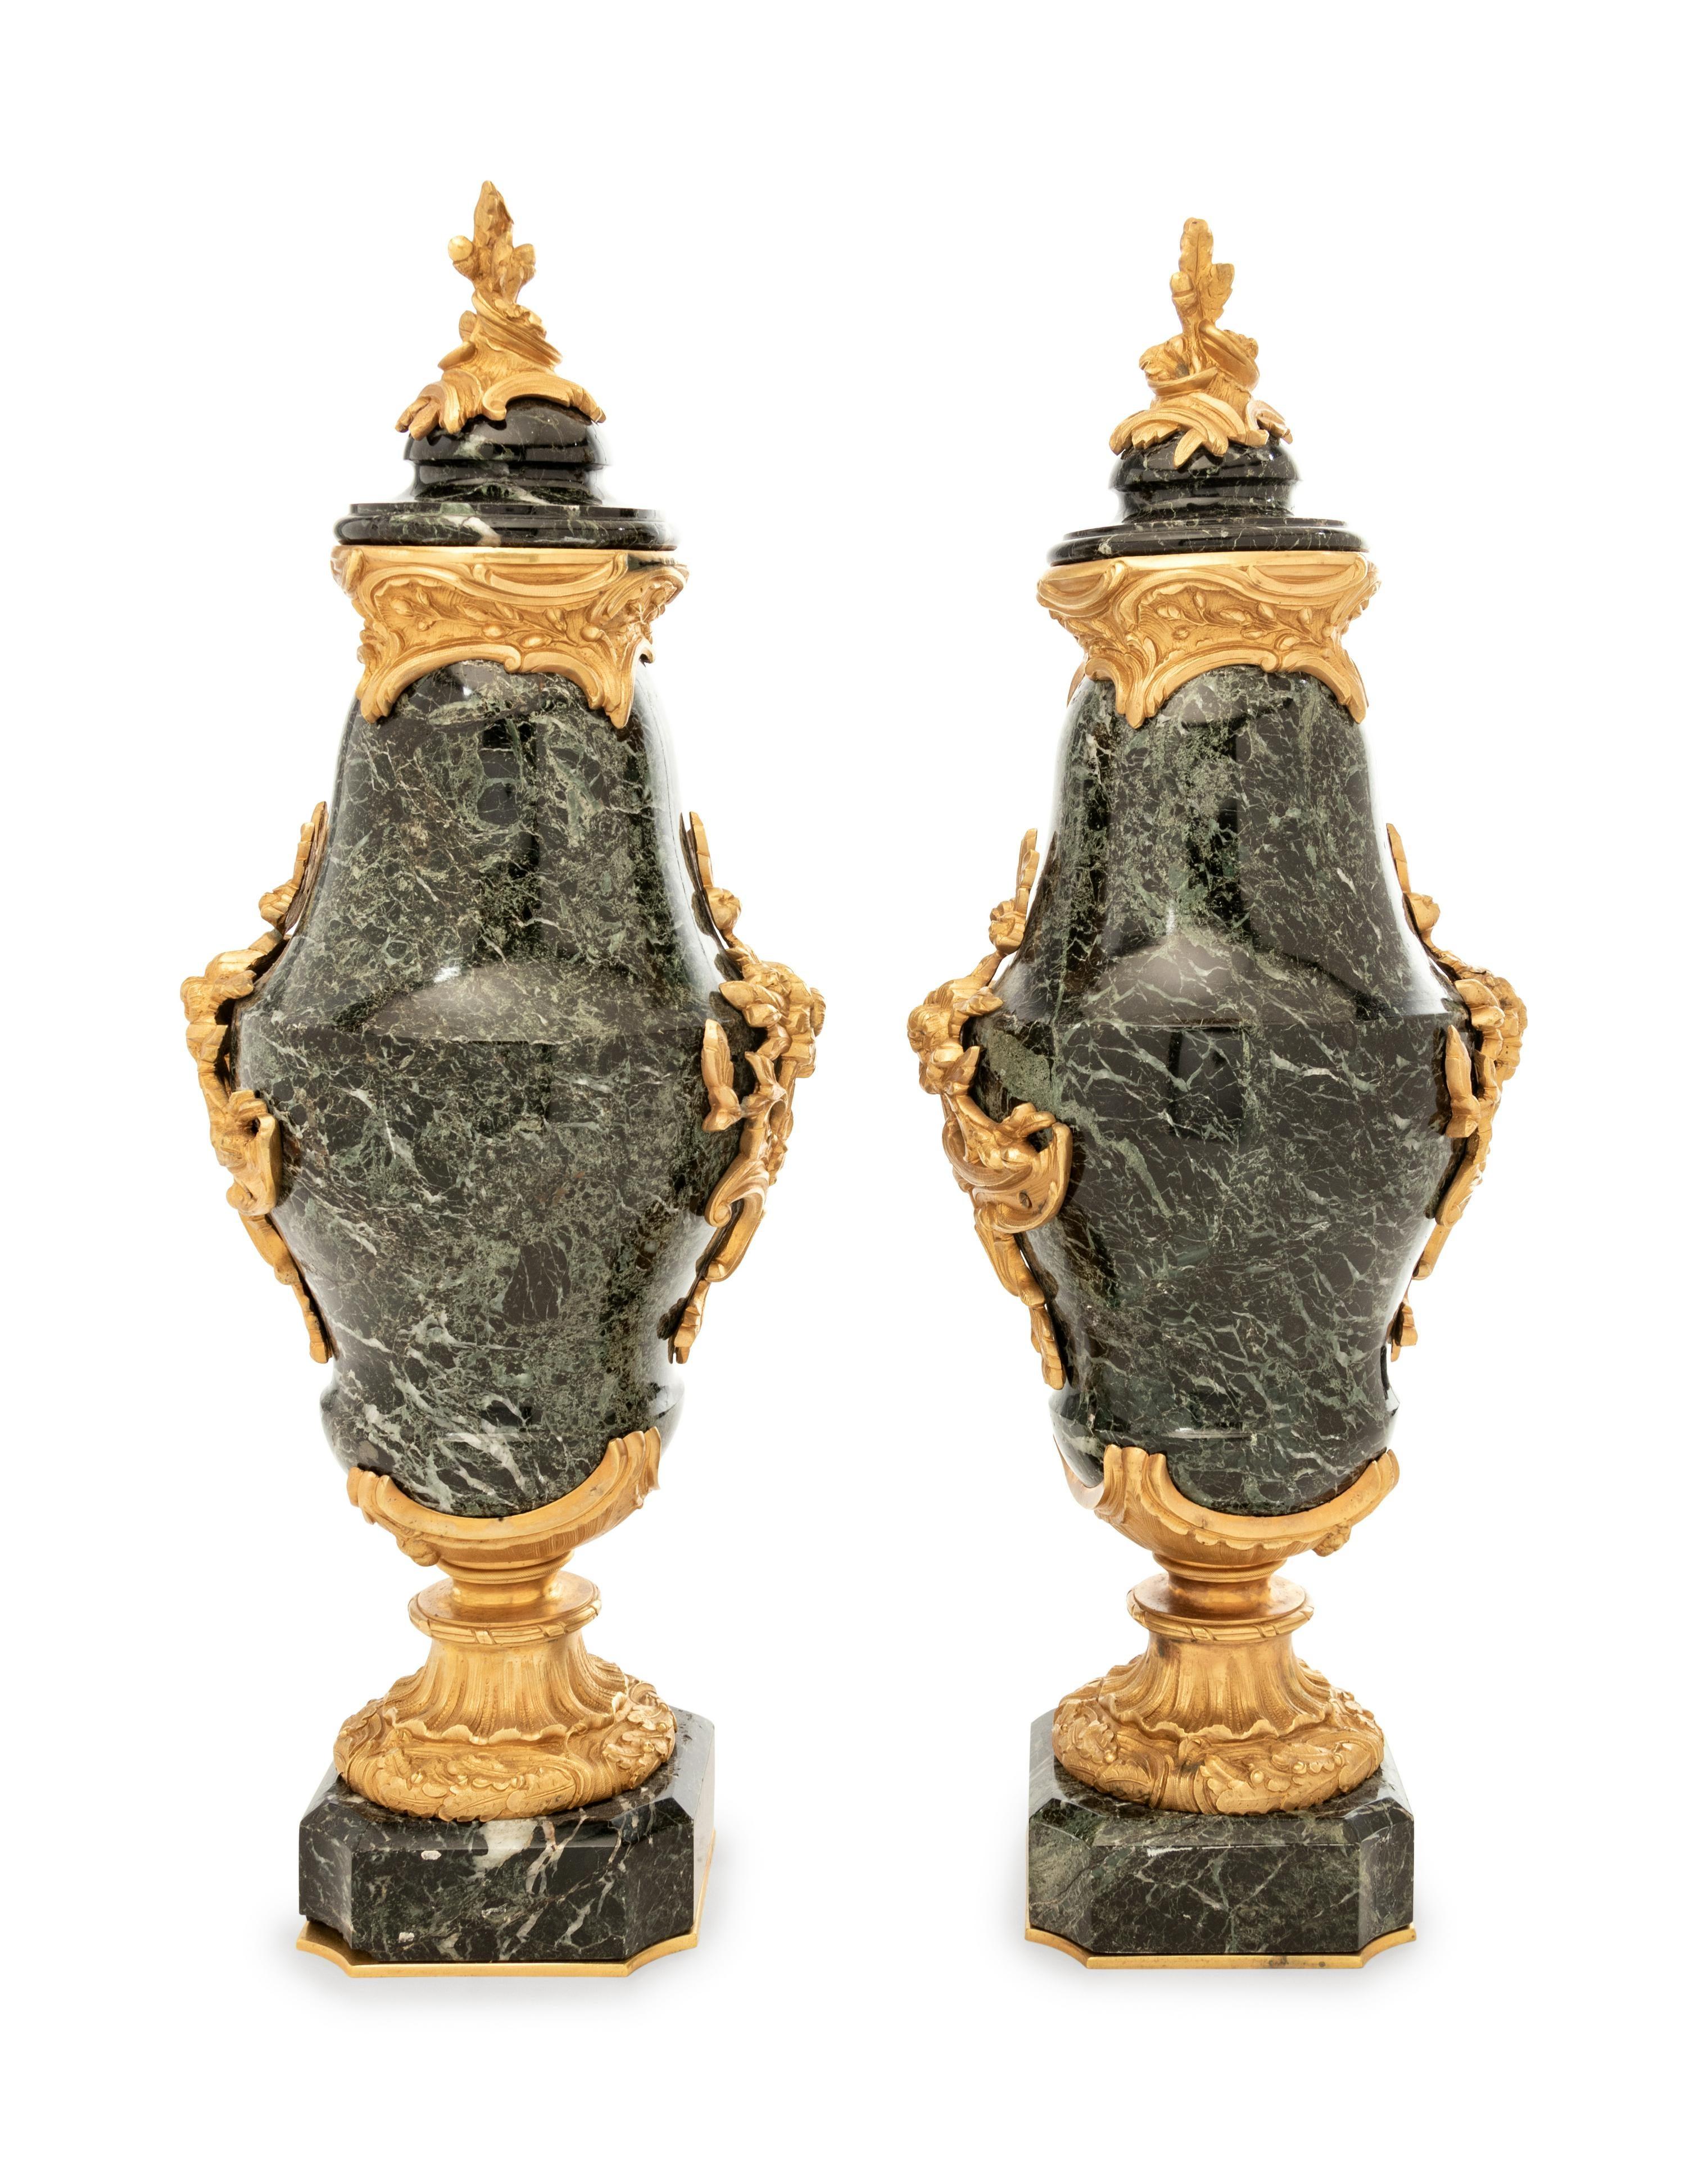 A pair of fine 19th century French green marble and gilt bronze lidded urns. Original gilt bronze with crisp detail.